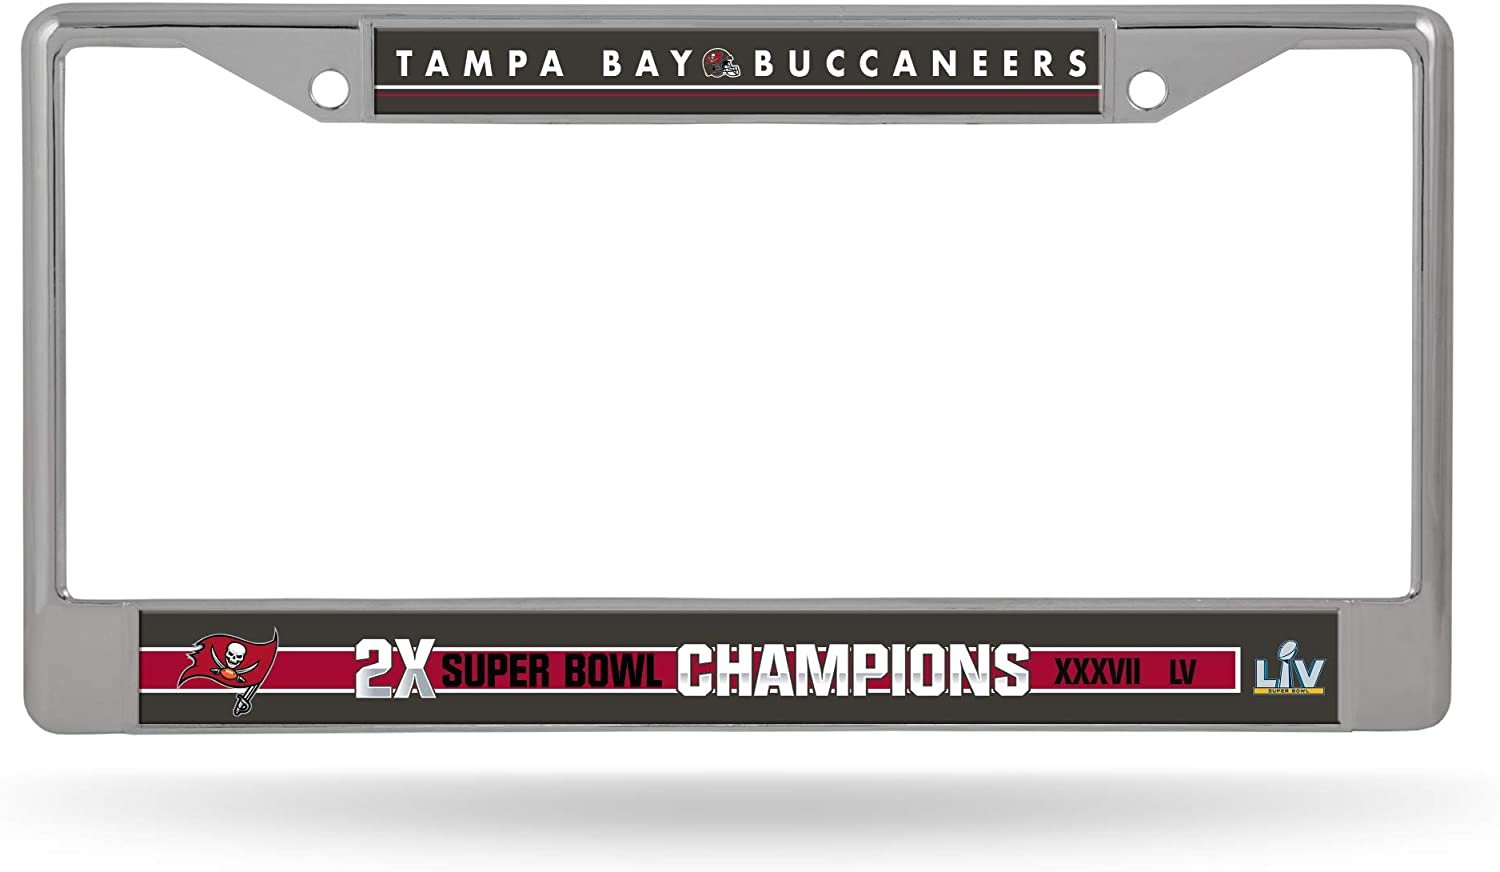 Tampa Bay Buccaneers 2 Time Champions Metal License Plate Frame Chrome Tag Cover, 12x6 Inch